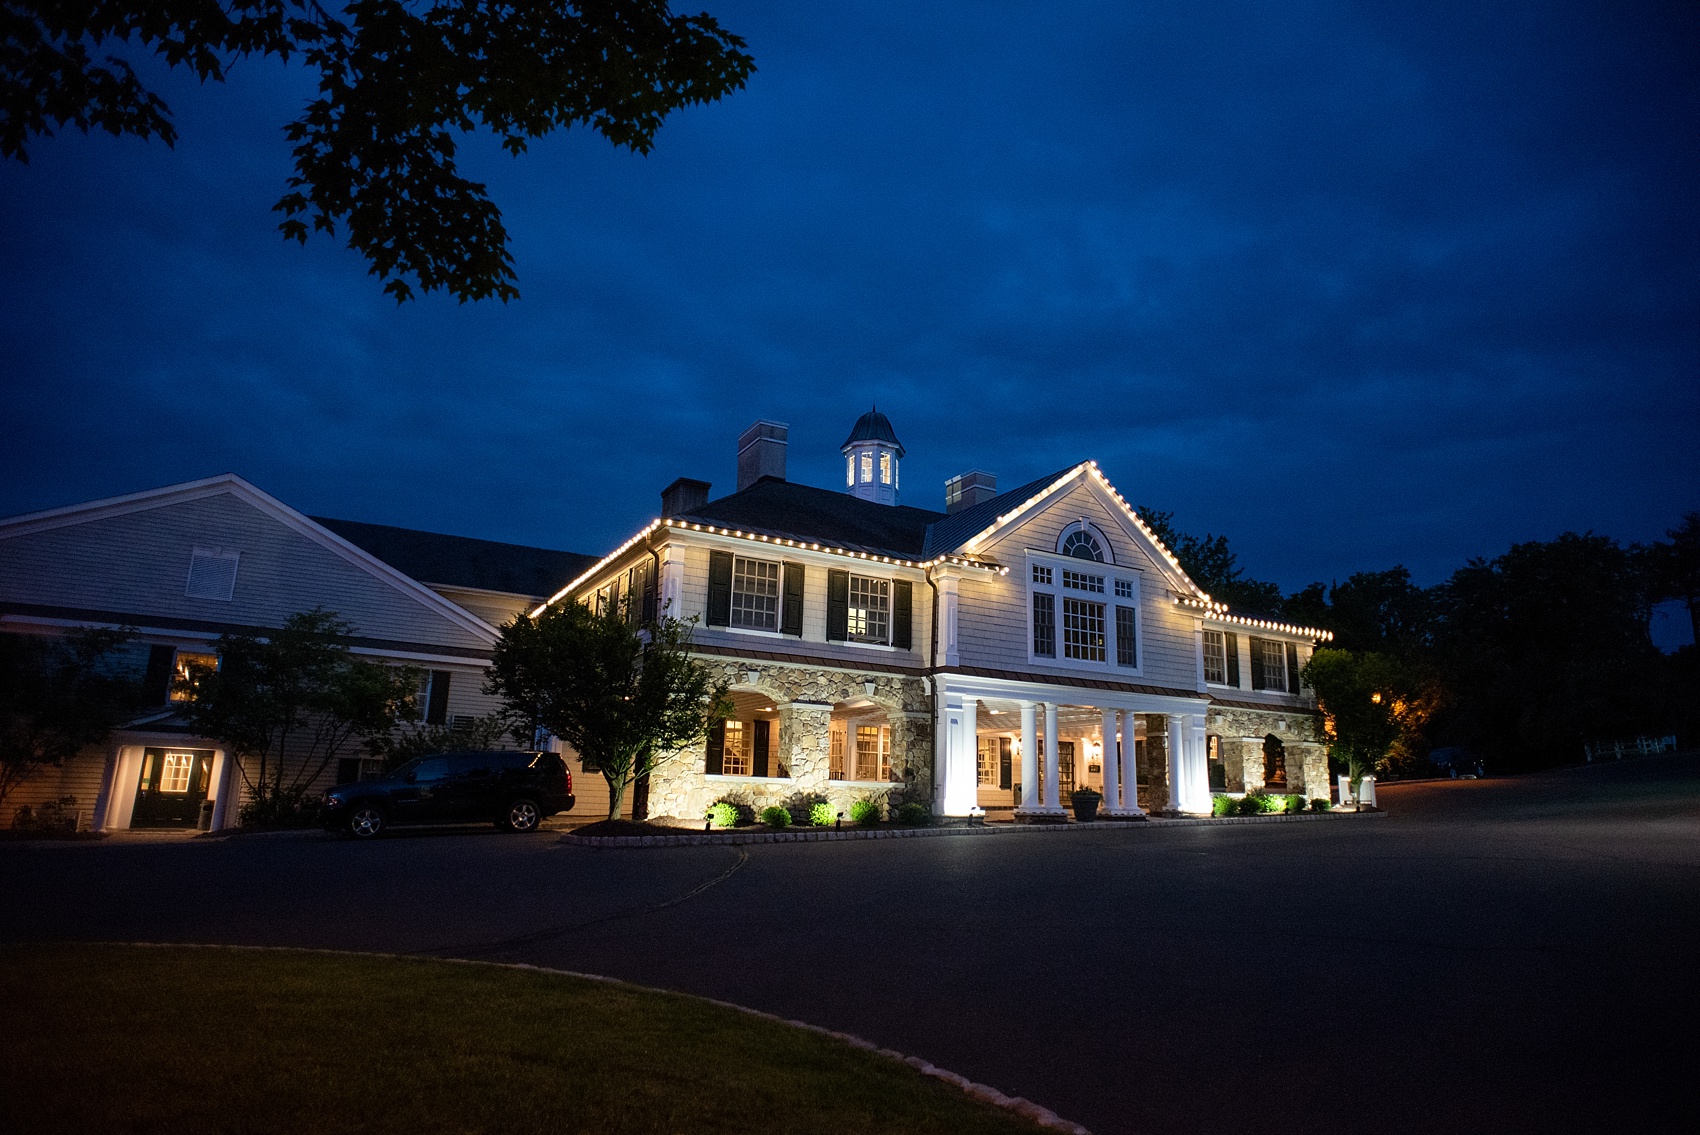 A summer wedding at Olde Mill Inn, NJ. Photos by Mikkel Paige Photography for an event with light pink and blue details. This New Jersey venue is a great option for something not too far from NYC. #OldeMillInn #NJwedding #NJweddingphotographer #mikkelpaige #NewJerseyWeddingVenue #NewJerseyWedding